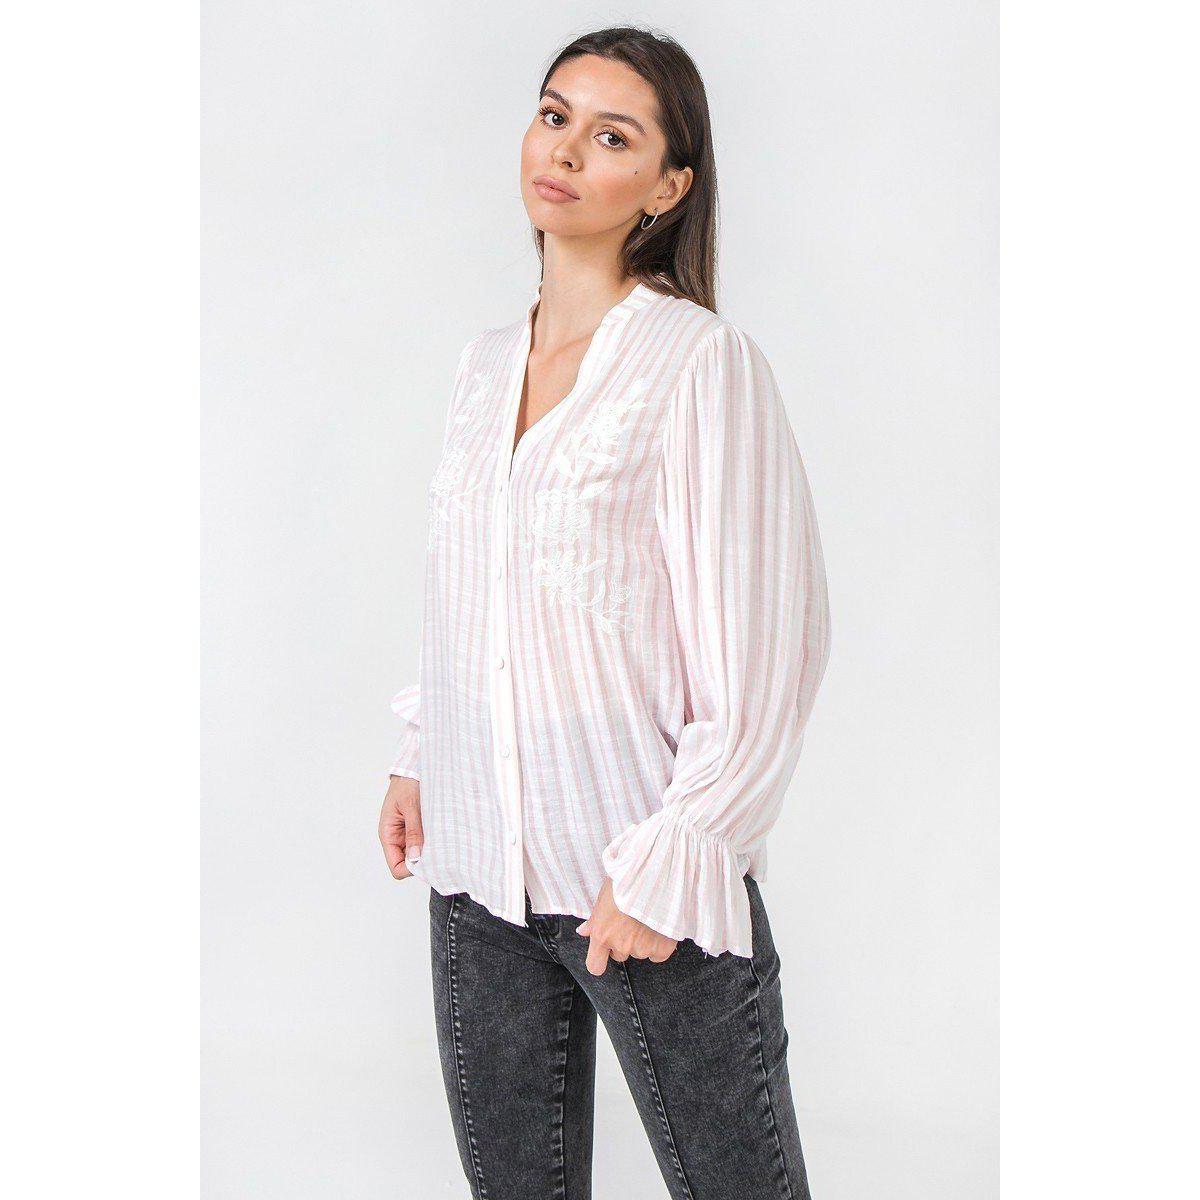 A Floral Eyelet And Solid Mixed Top-Women's Fashion - Women's Clothing - Blouses & Shirts-NXTLVLNYC